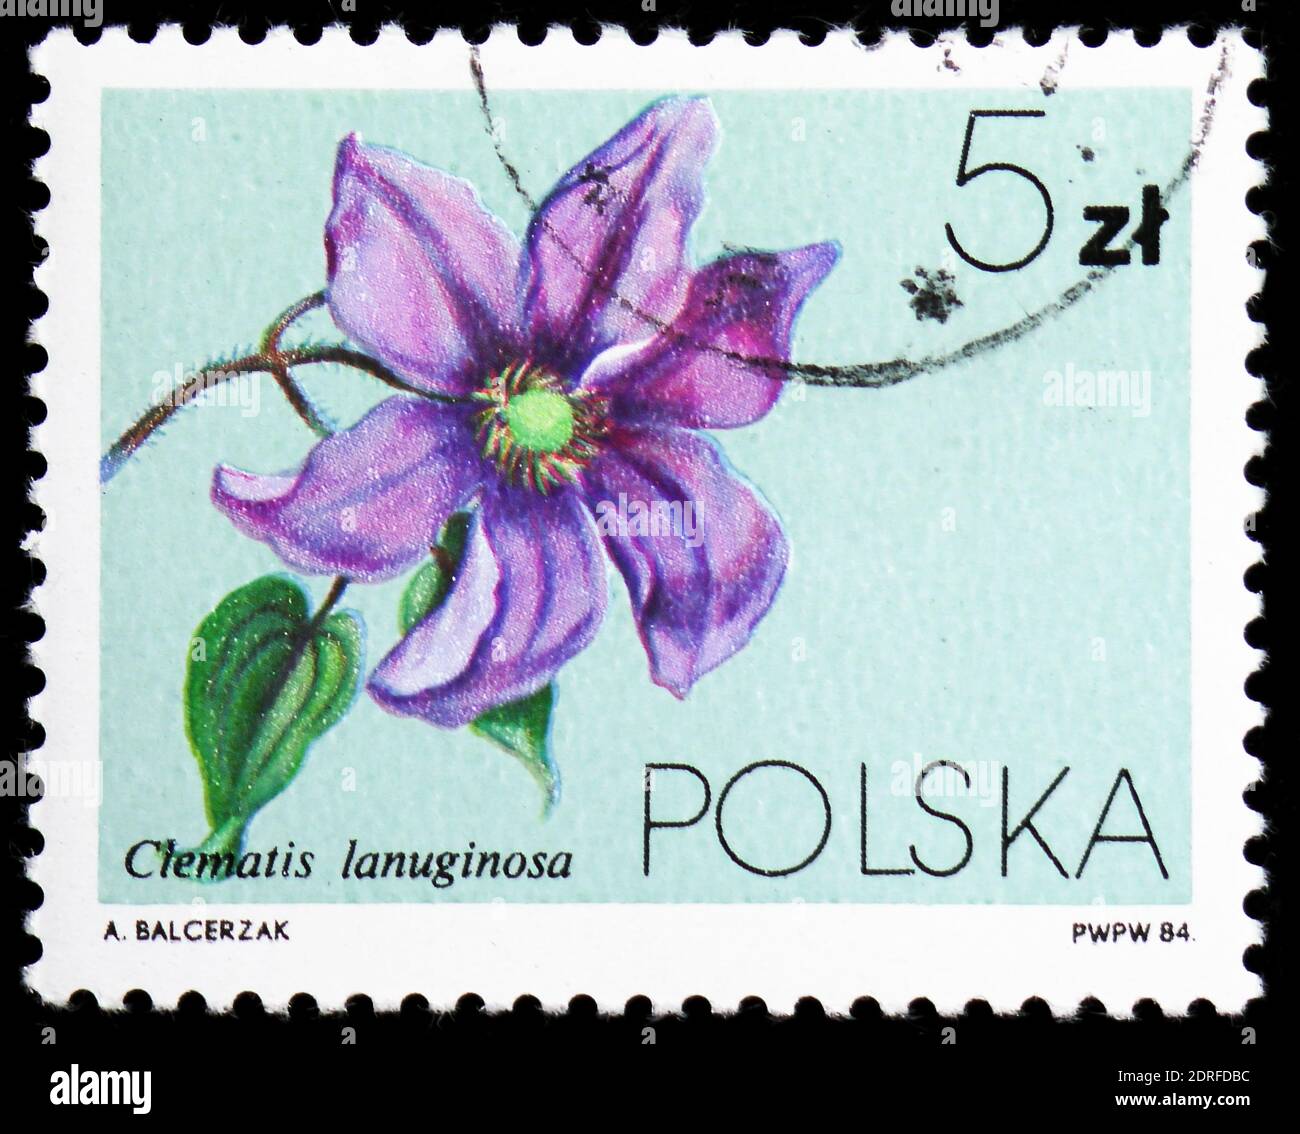 MOSCOW, RUSSIA - JANUARY 4, 2019: A stamp printed in Poland shows Clematis lanuginosa, Flowers Local - Clematis serie, circa 1984 Stock Photo